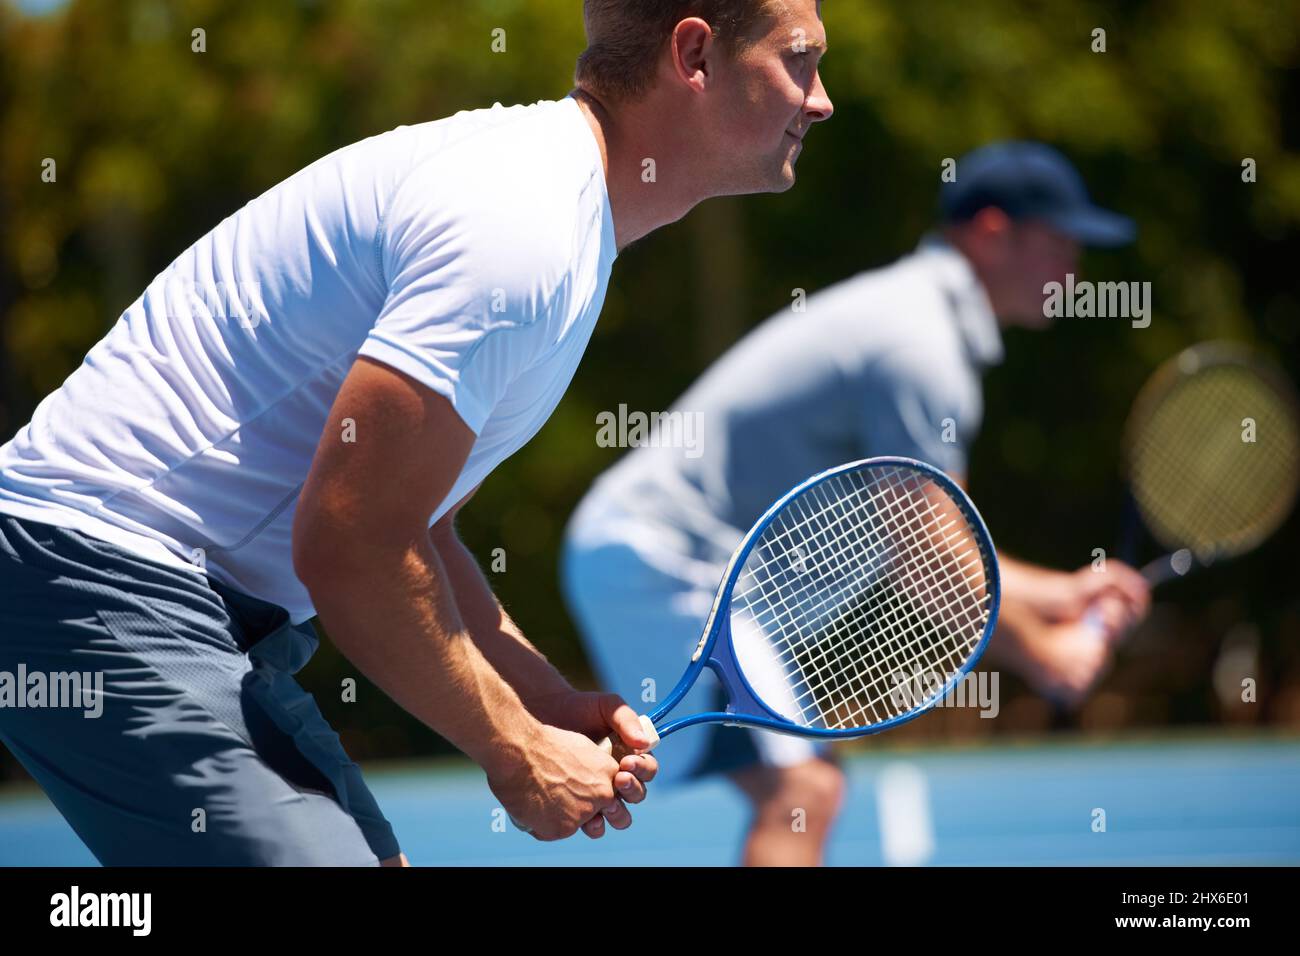 Team tennis. Shot of two men playing a tennis match on a sunny day. Stock Photo